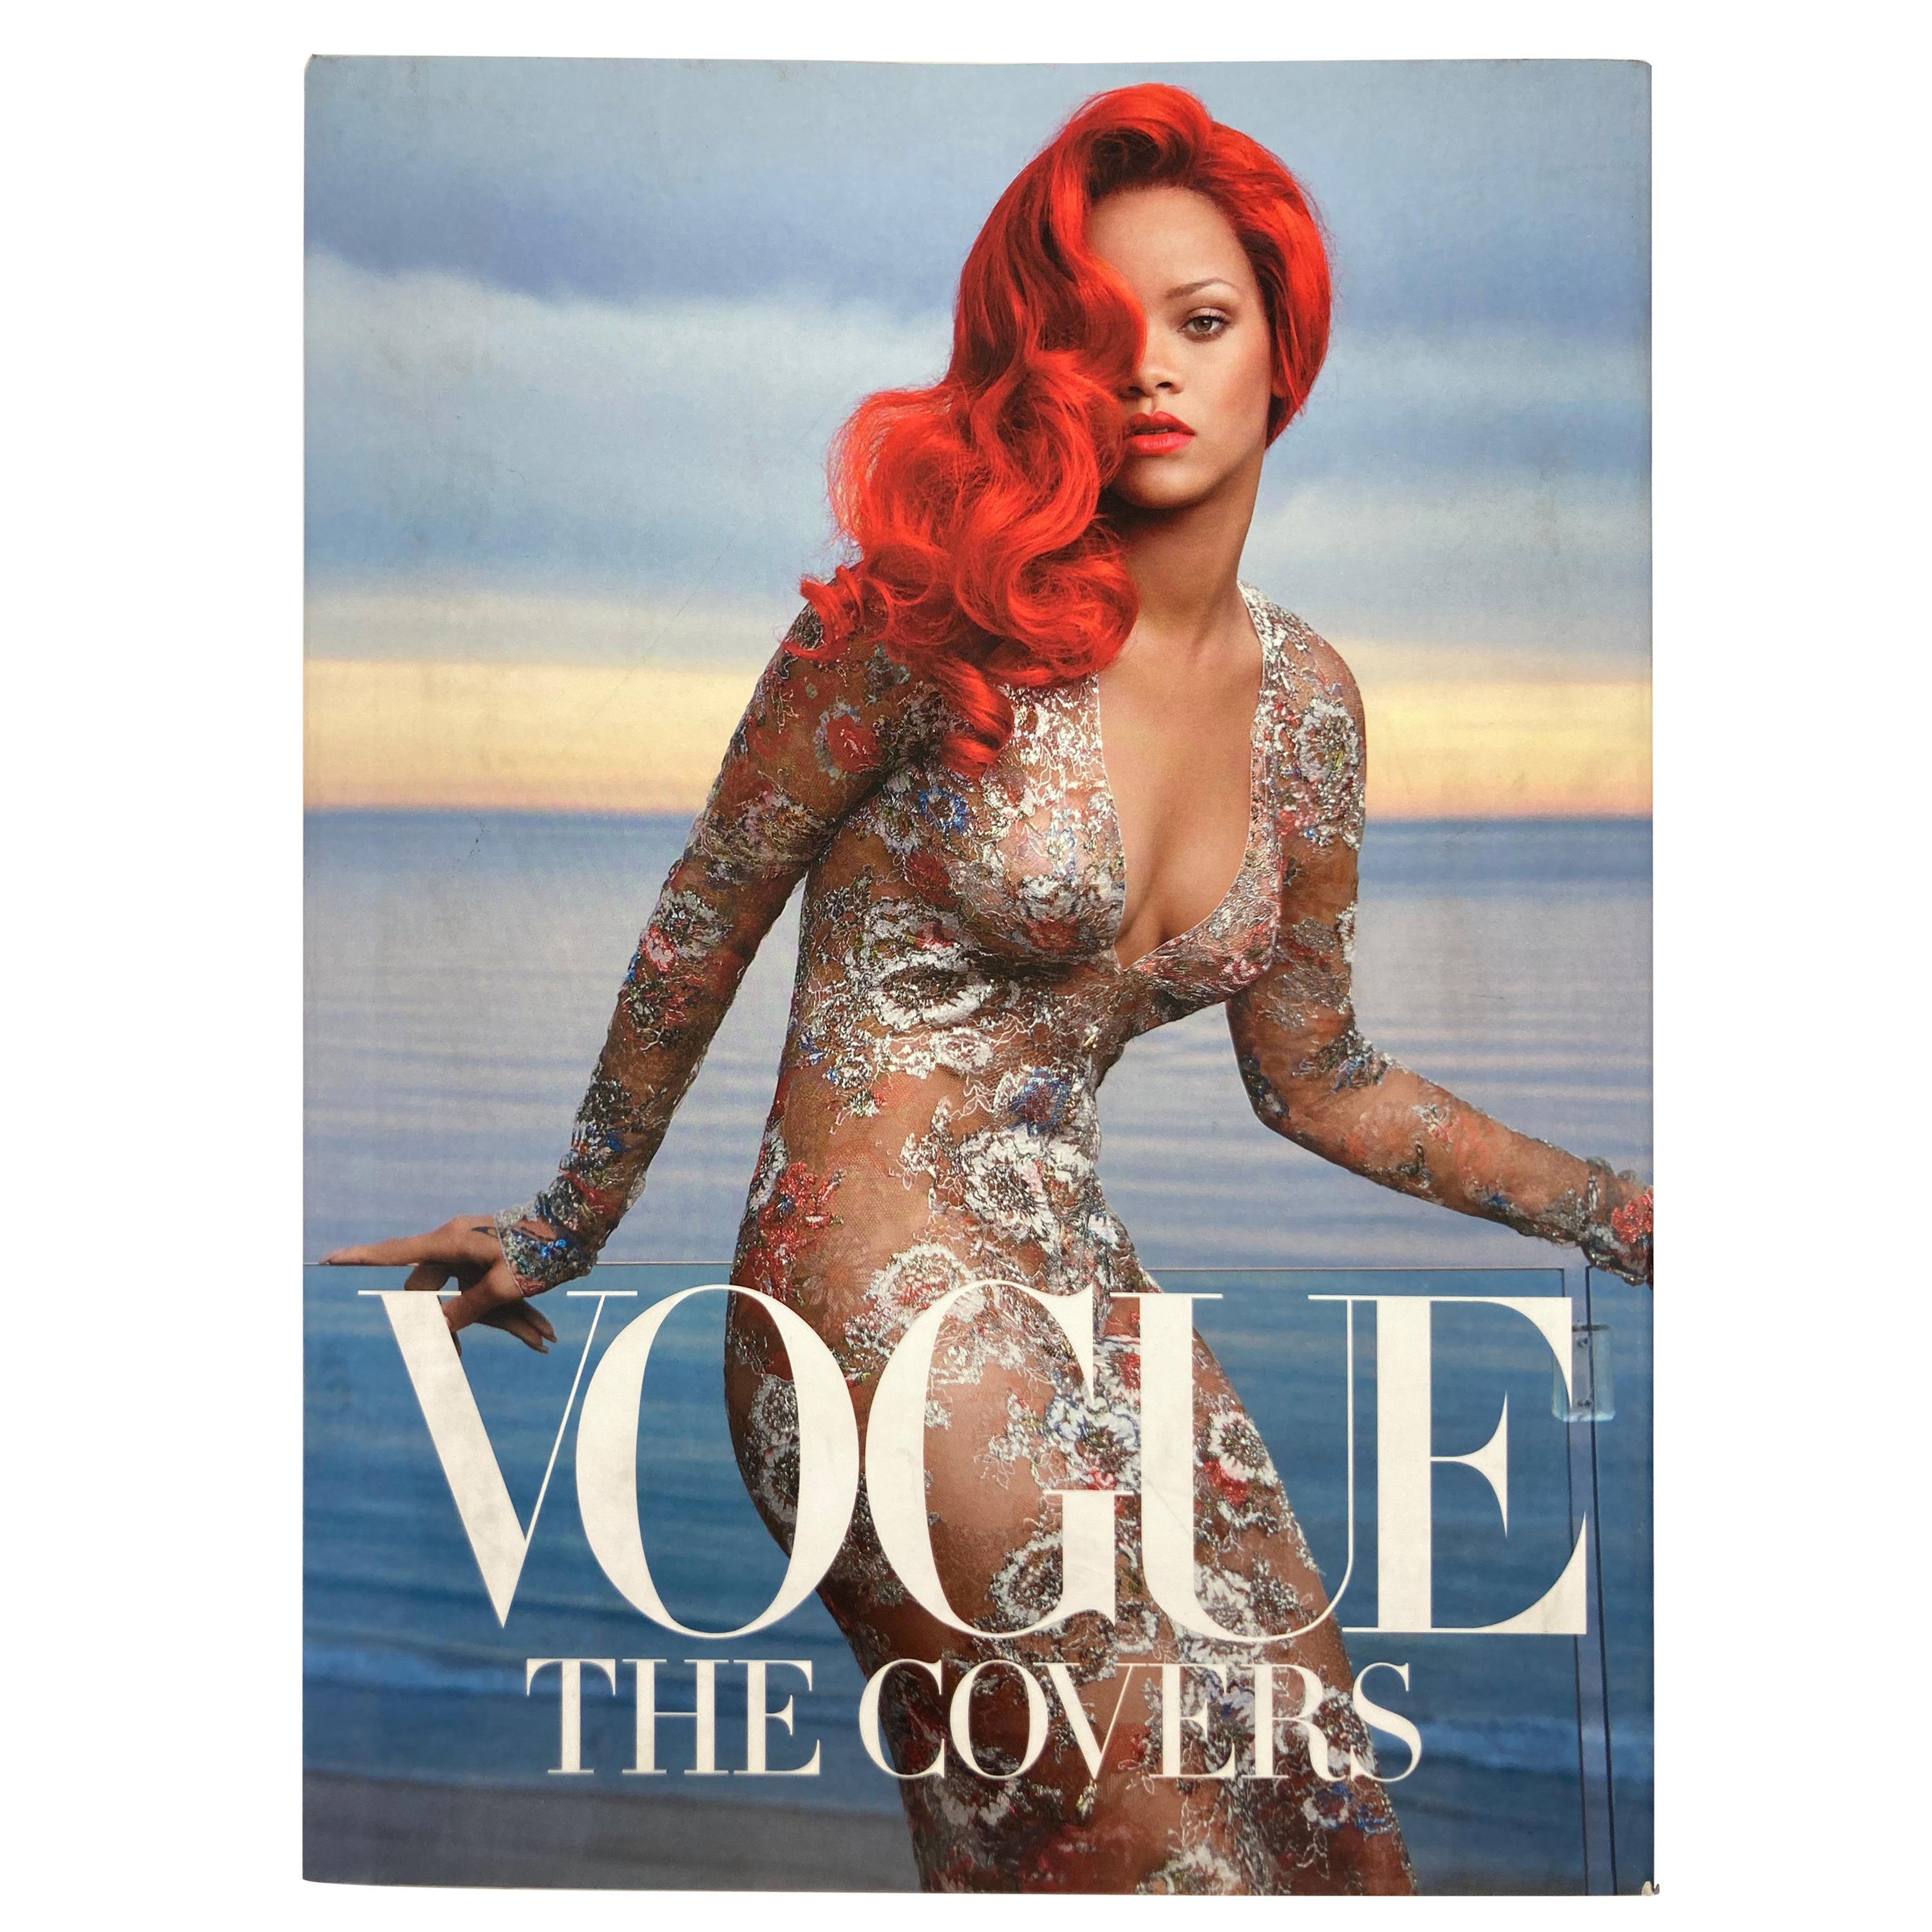 Vogue The Covers, Hardcover-Couchtischbuch im Angebot